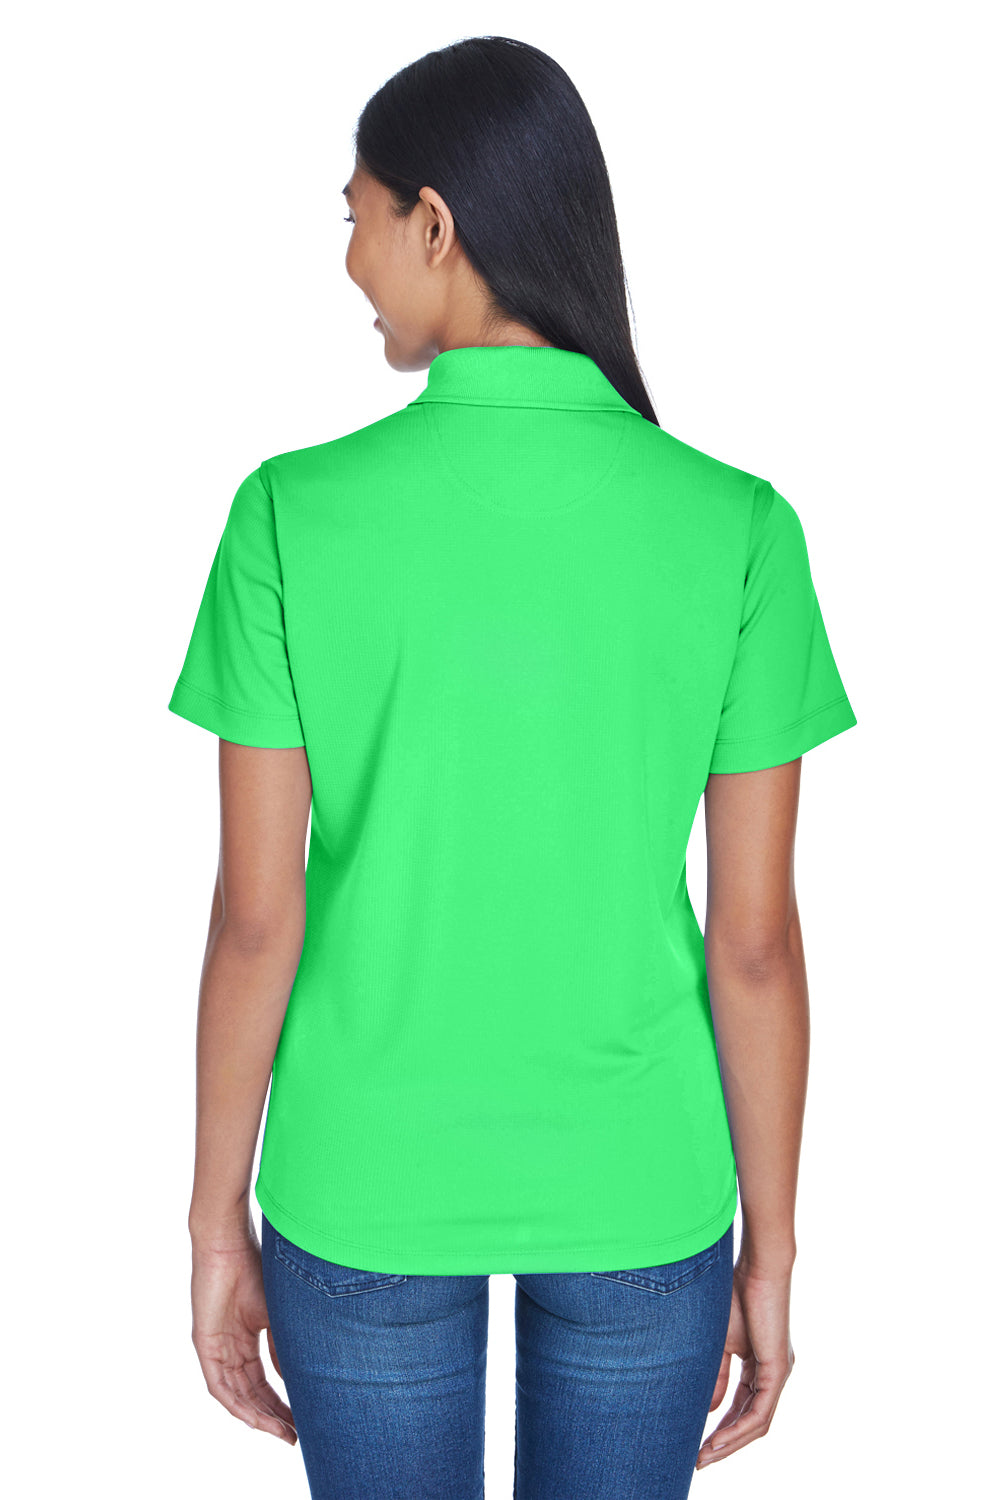 UltraClub 8445L Womens Cool & Dry Performance Moisture Wicking Short Sleeve Polo Shirt Cool Green Back